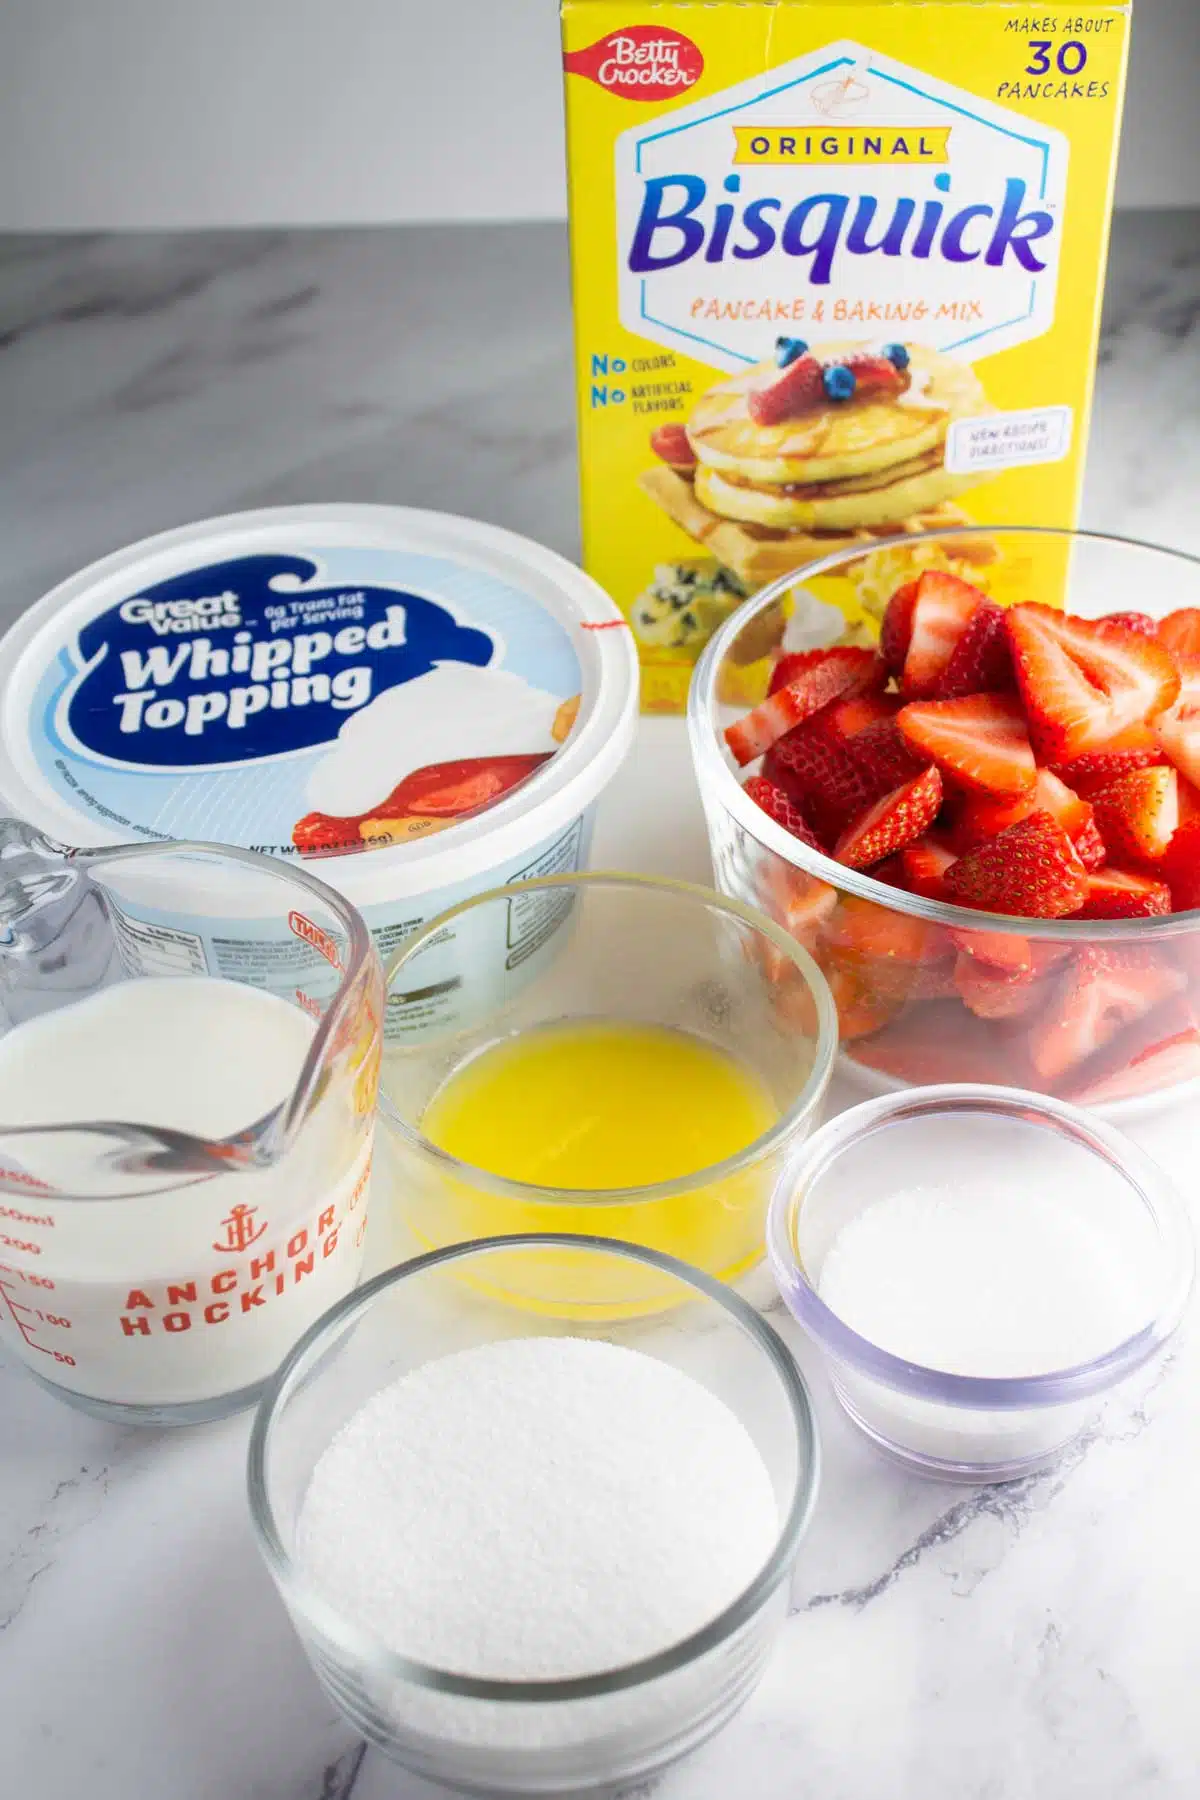 Tall image showing ingredients needed for Bisquick strawberry shortcake.